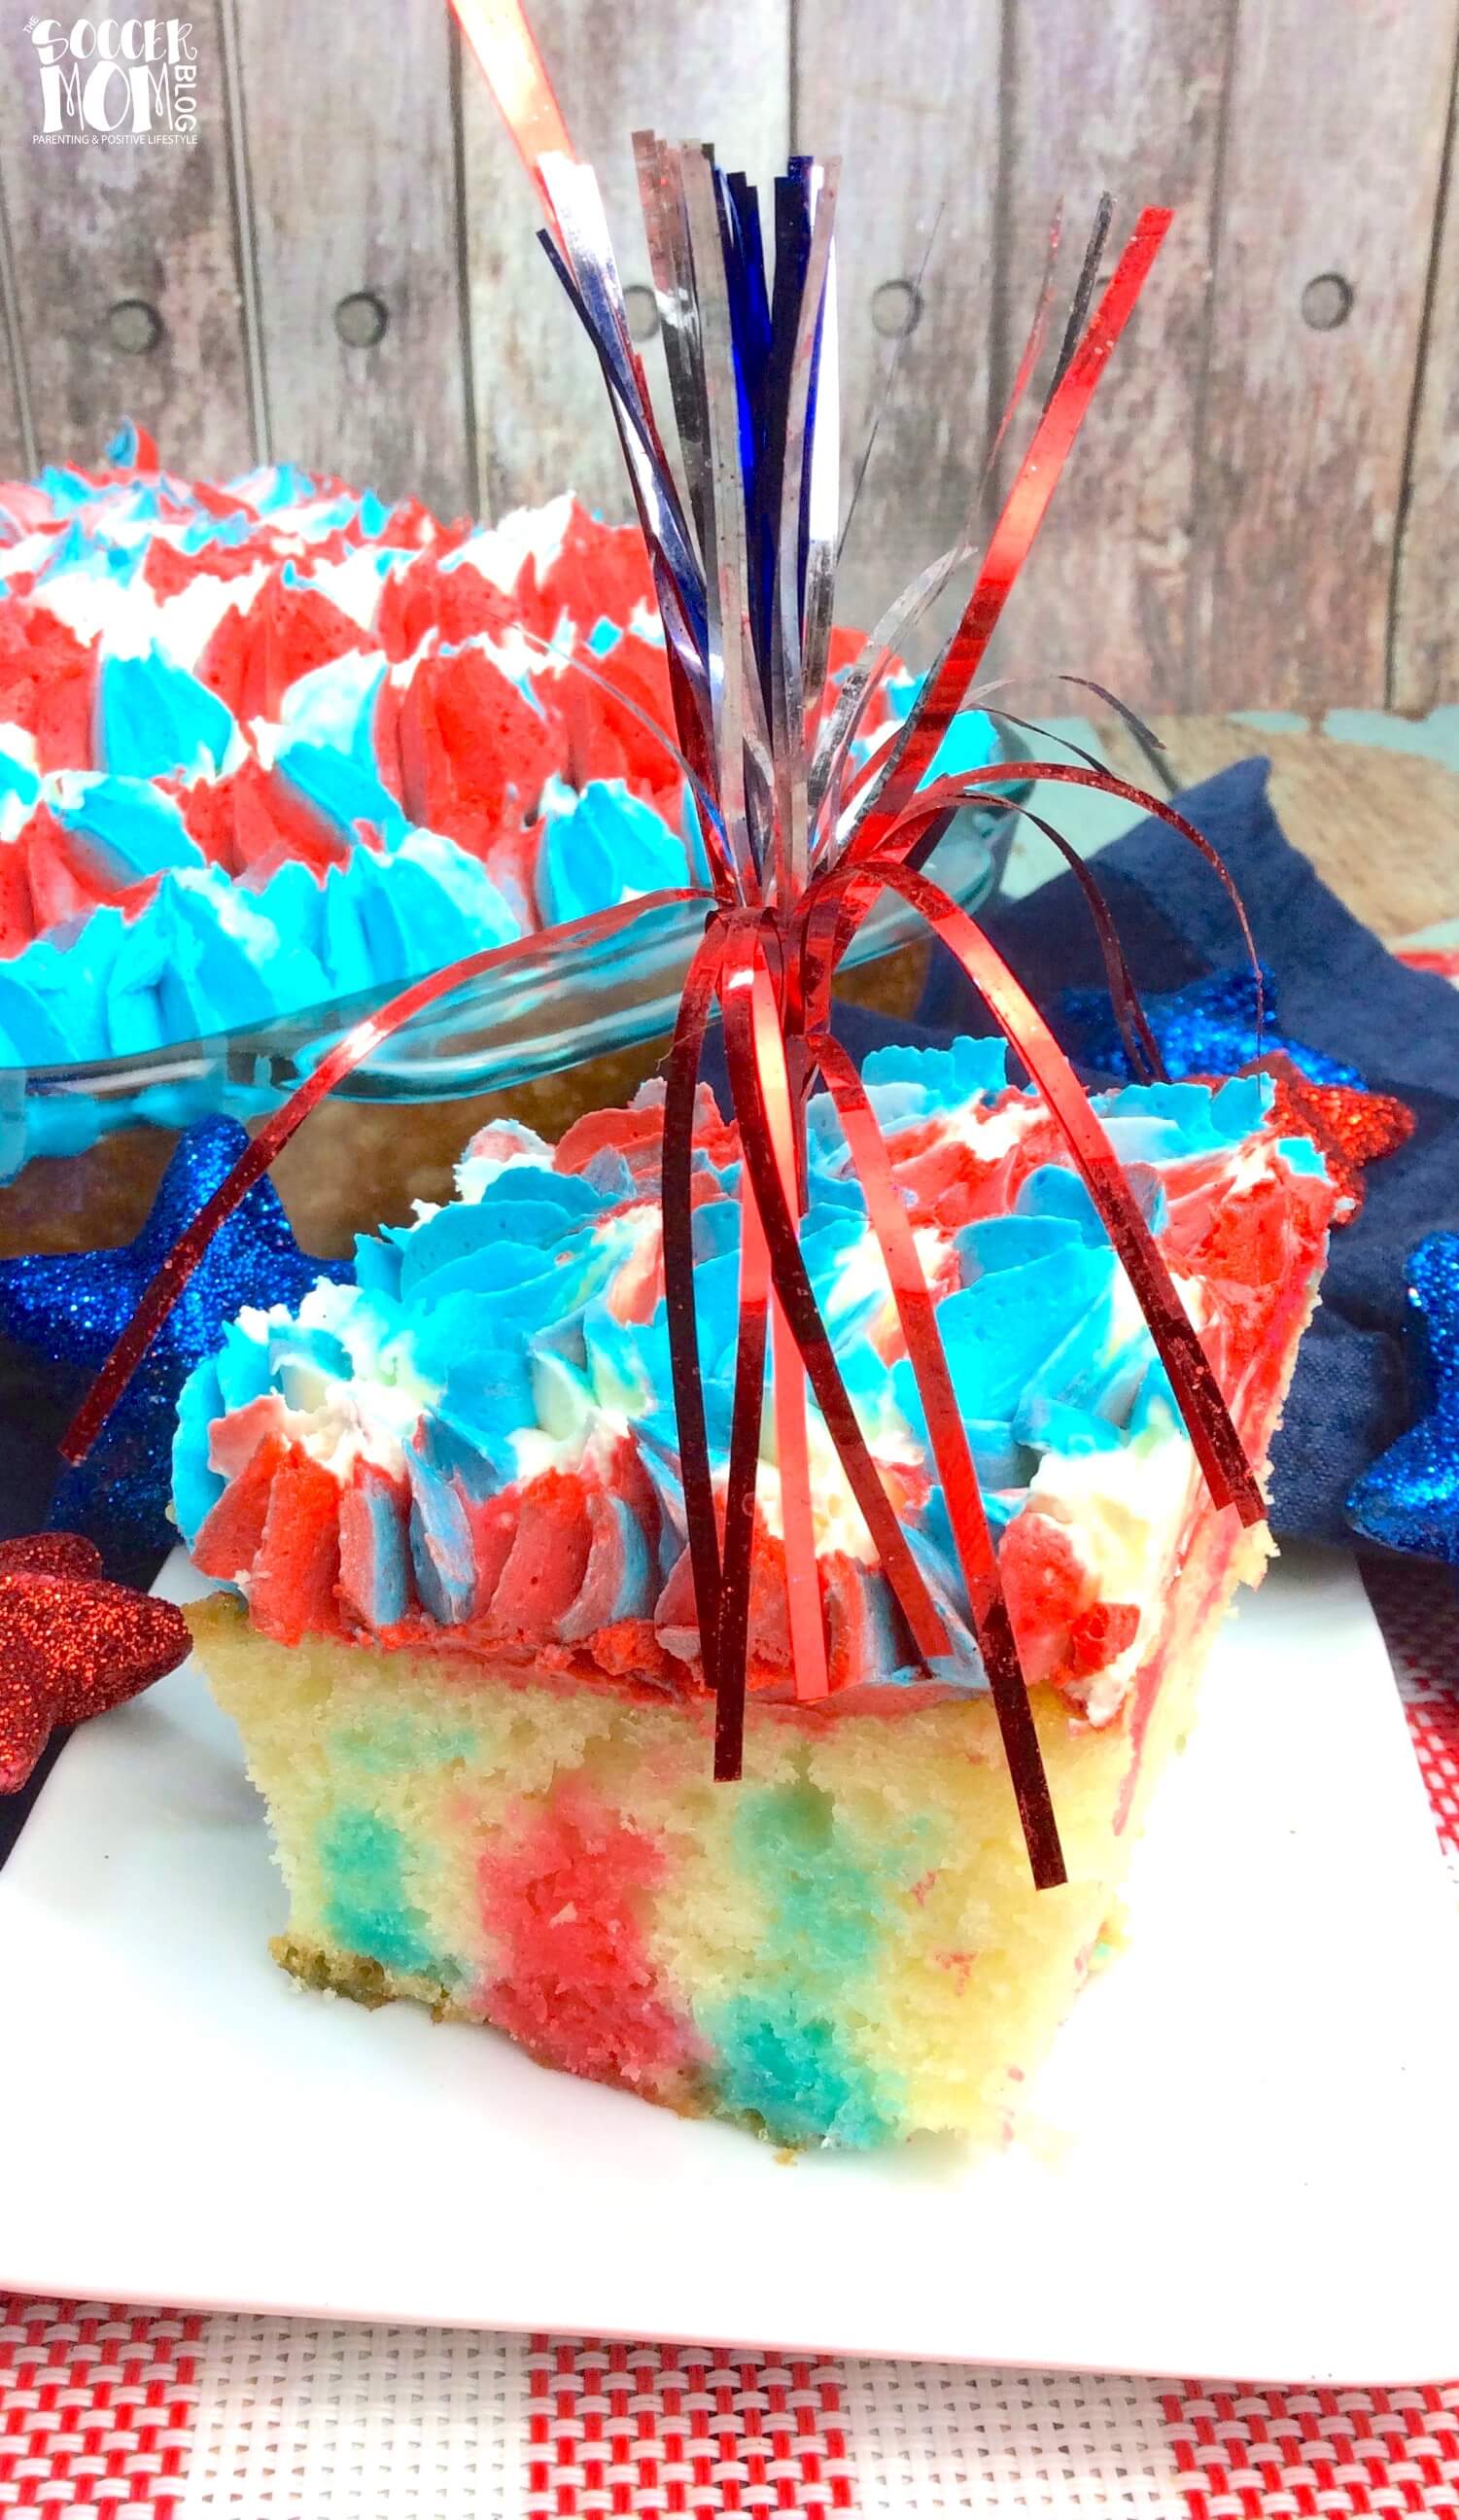 This stunning Red White & Blue Jello Poke Cake is guaranteed to be the star of the party! The perfect patriotic dessert for Memorial Day or the 4th of July.